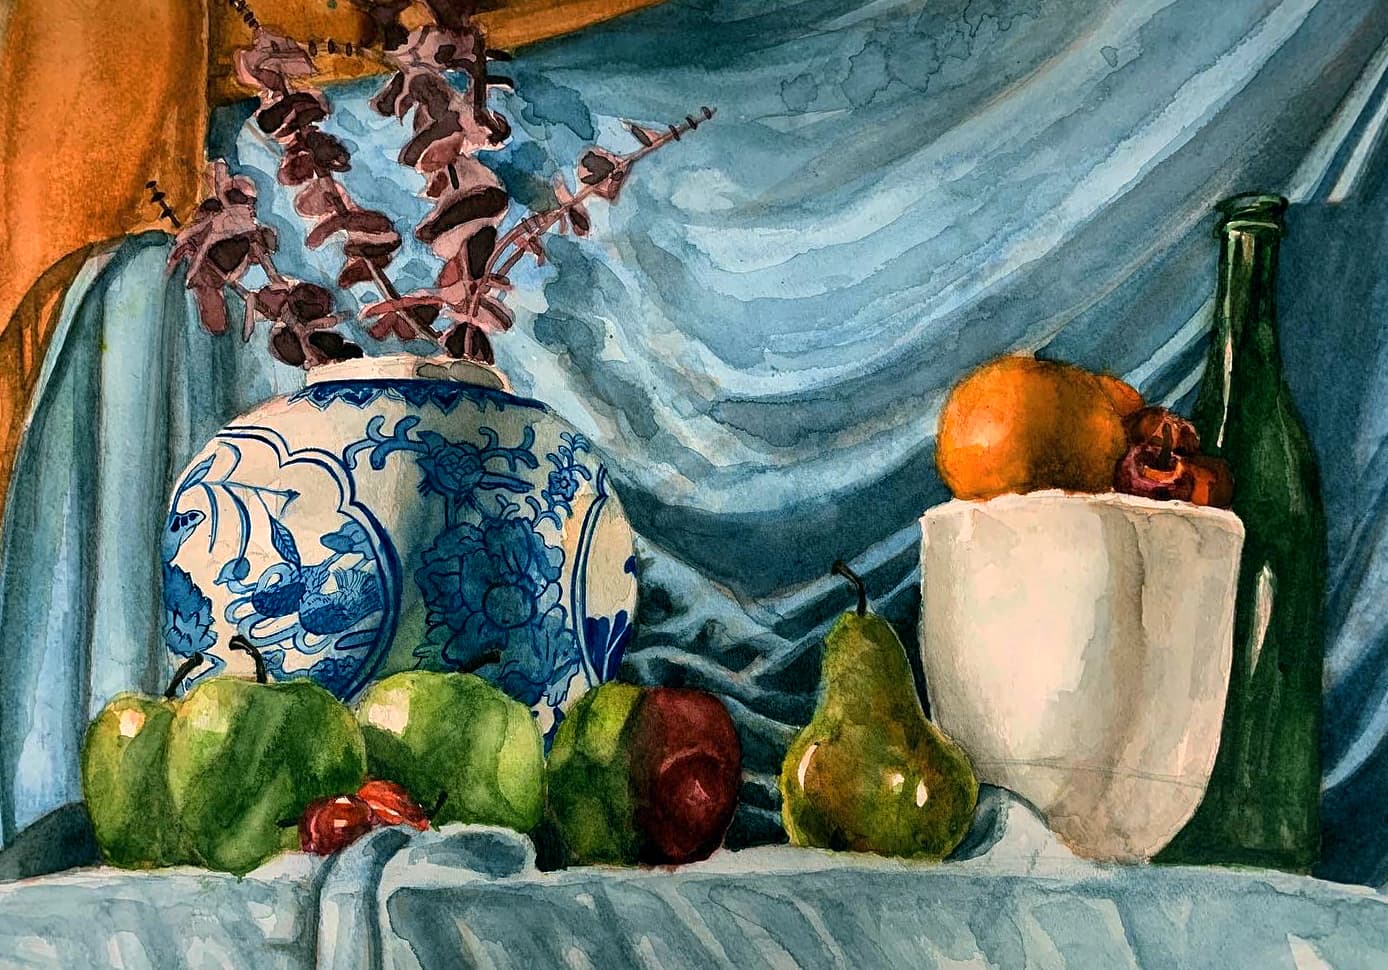 Still Life of a glass bottle, a vase, and some fruit